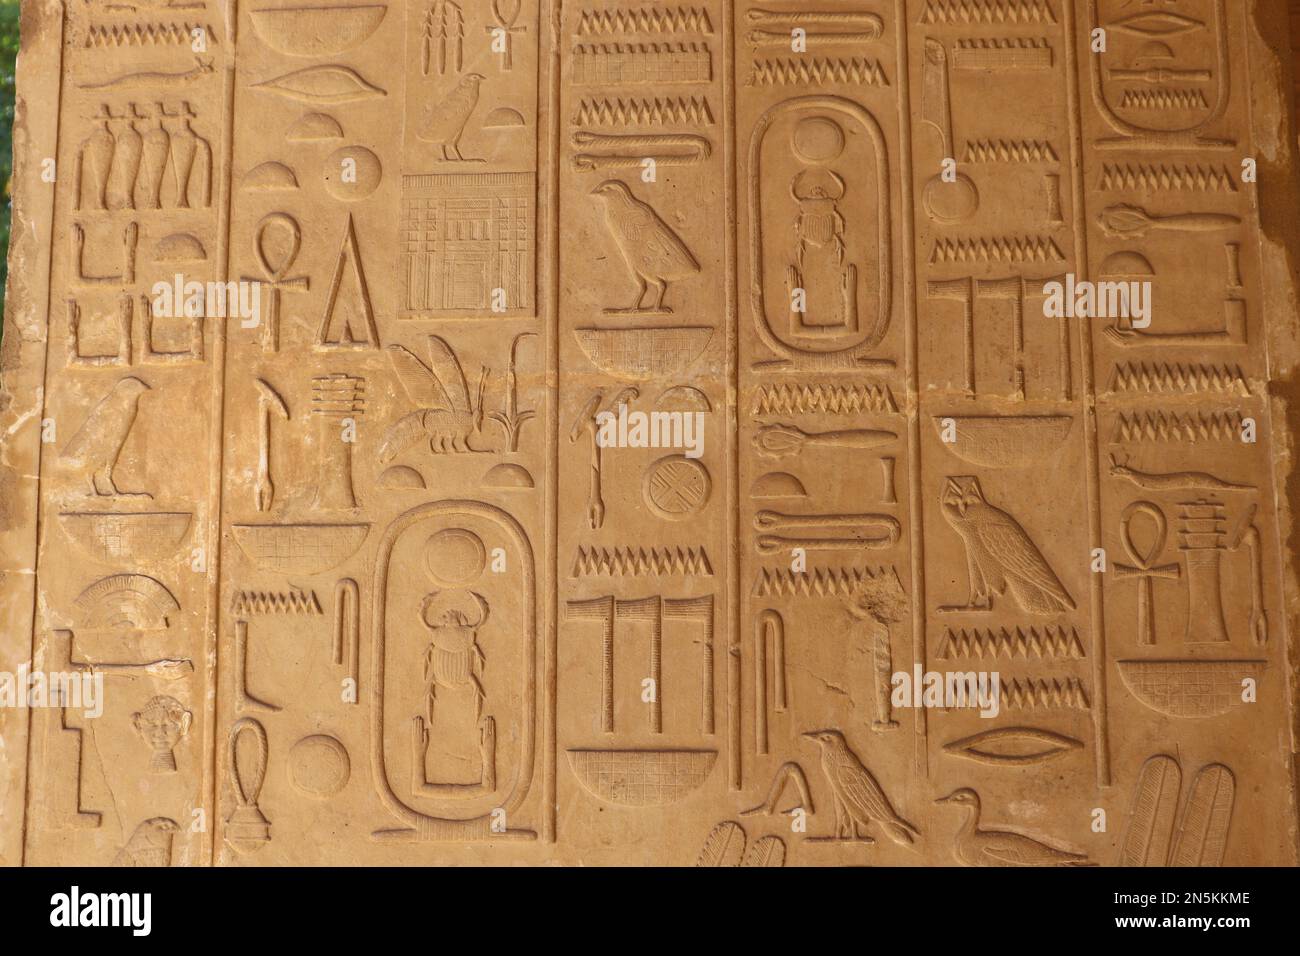 ancient egyptian symbols and hieroglyphs carved at Karnak temple in Luxor, Egypt Stock Photo